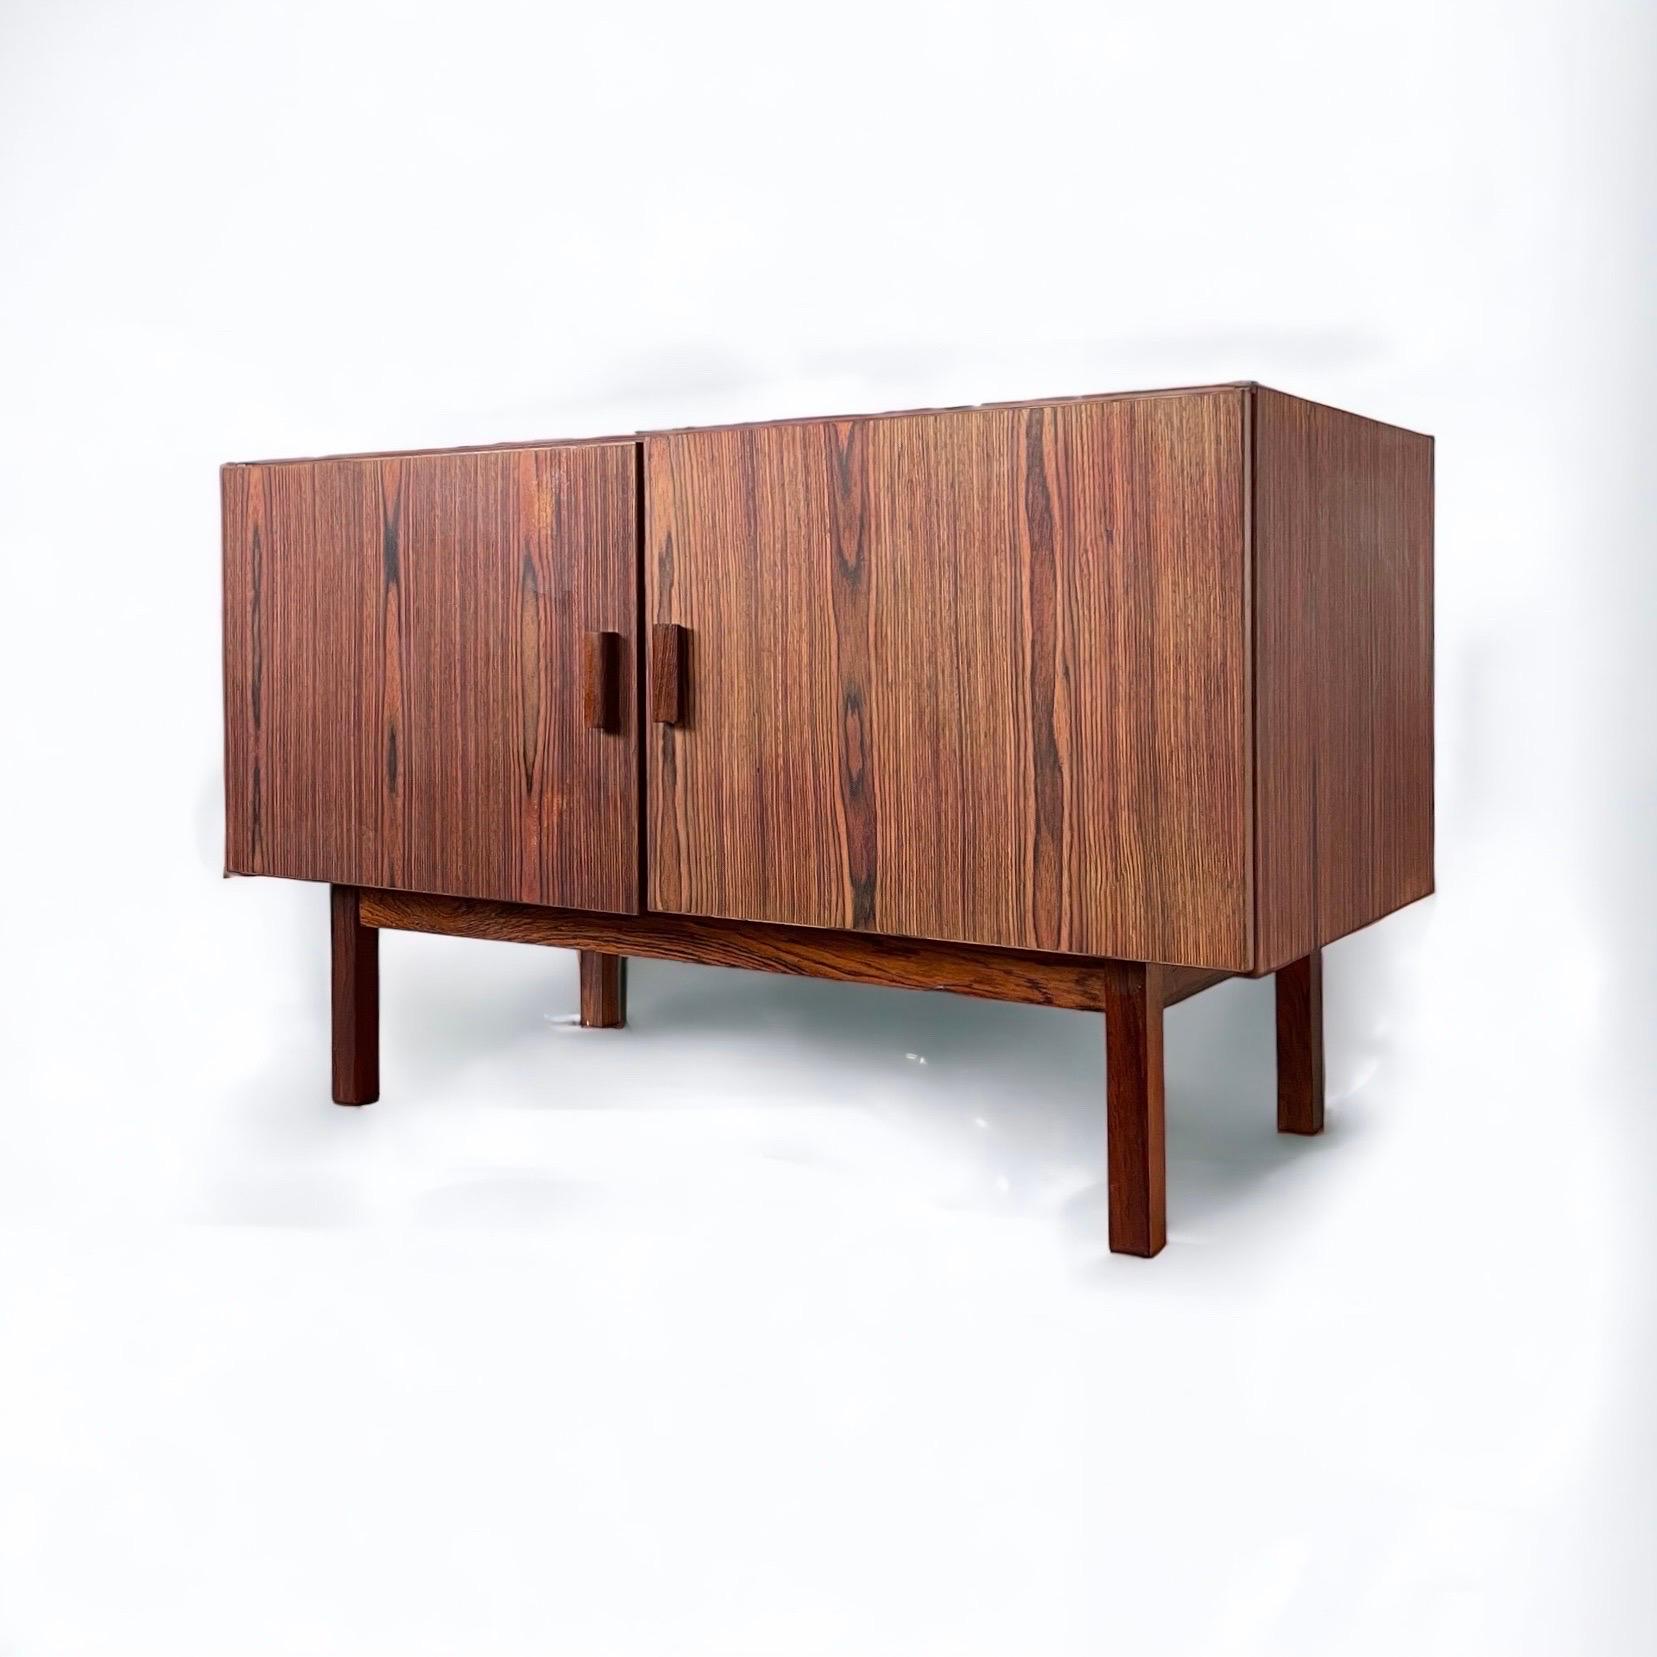 Low sideboard great for lots of storage space. Great for your record collection or Lovely wooden structure